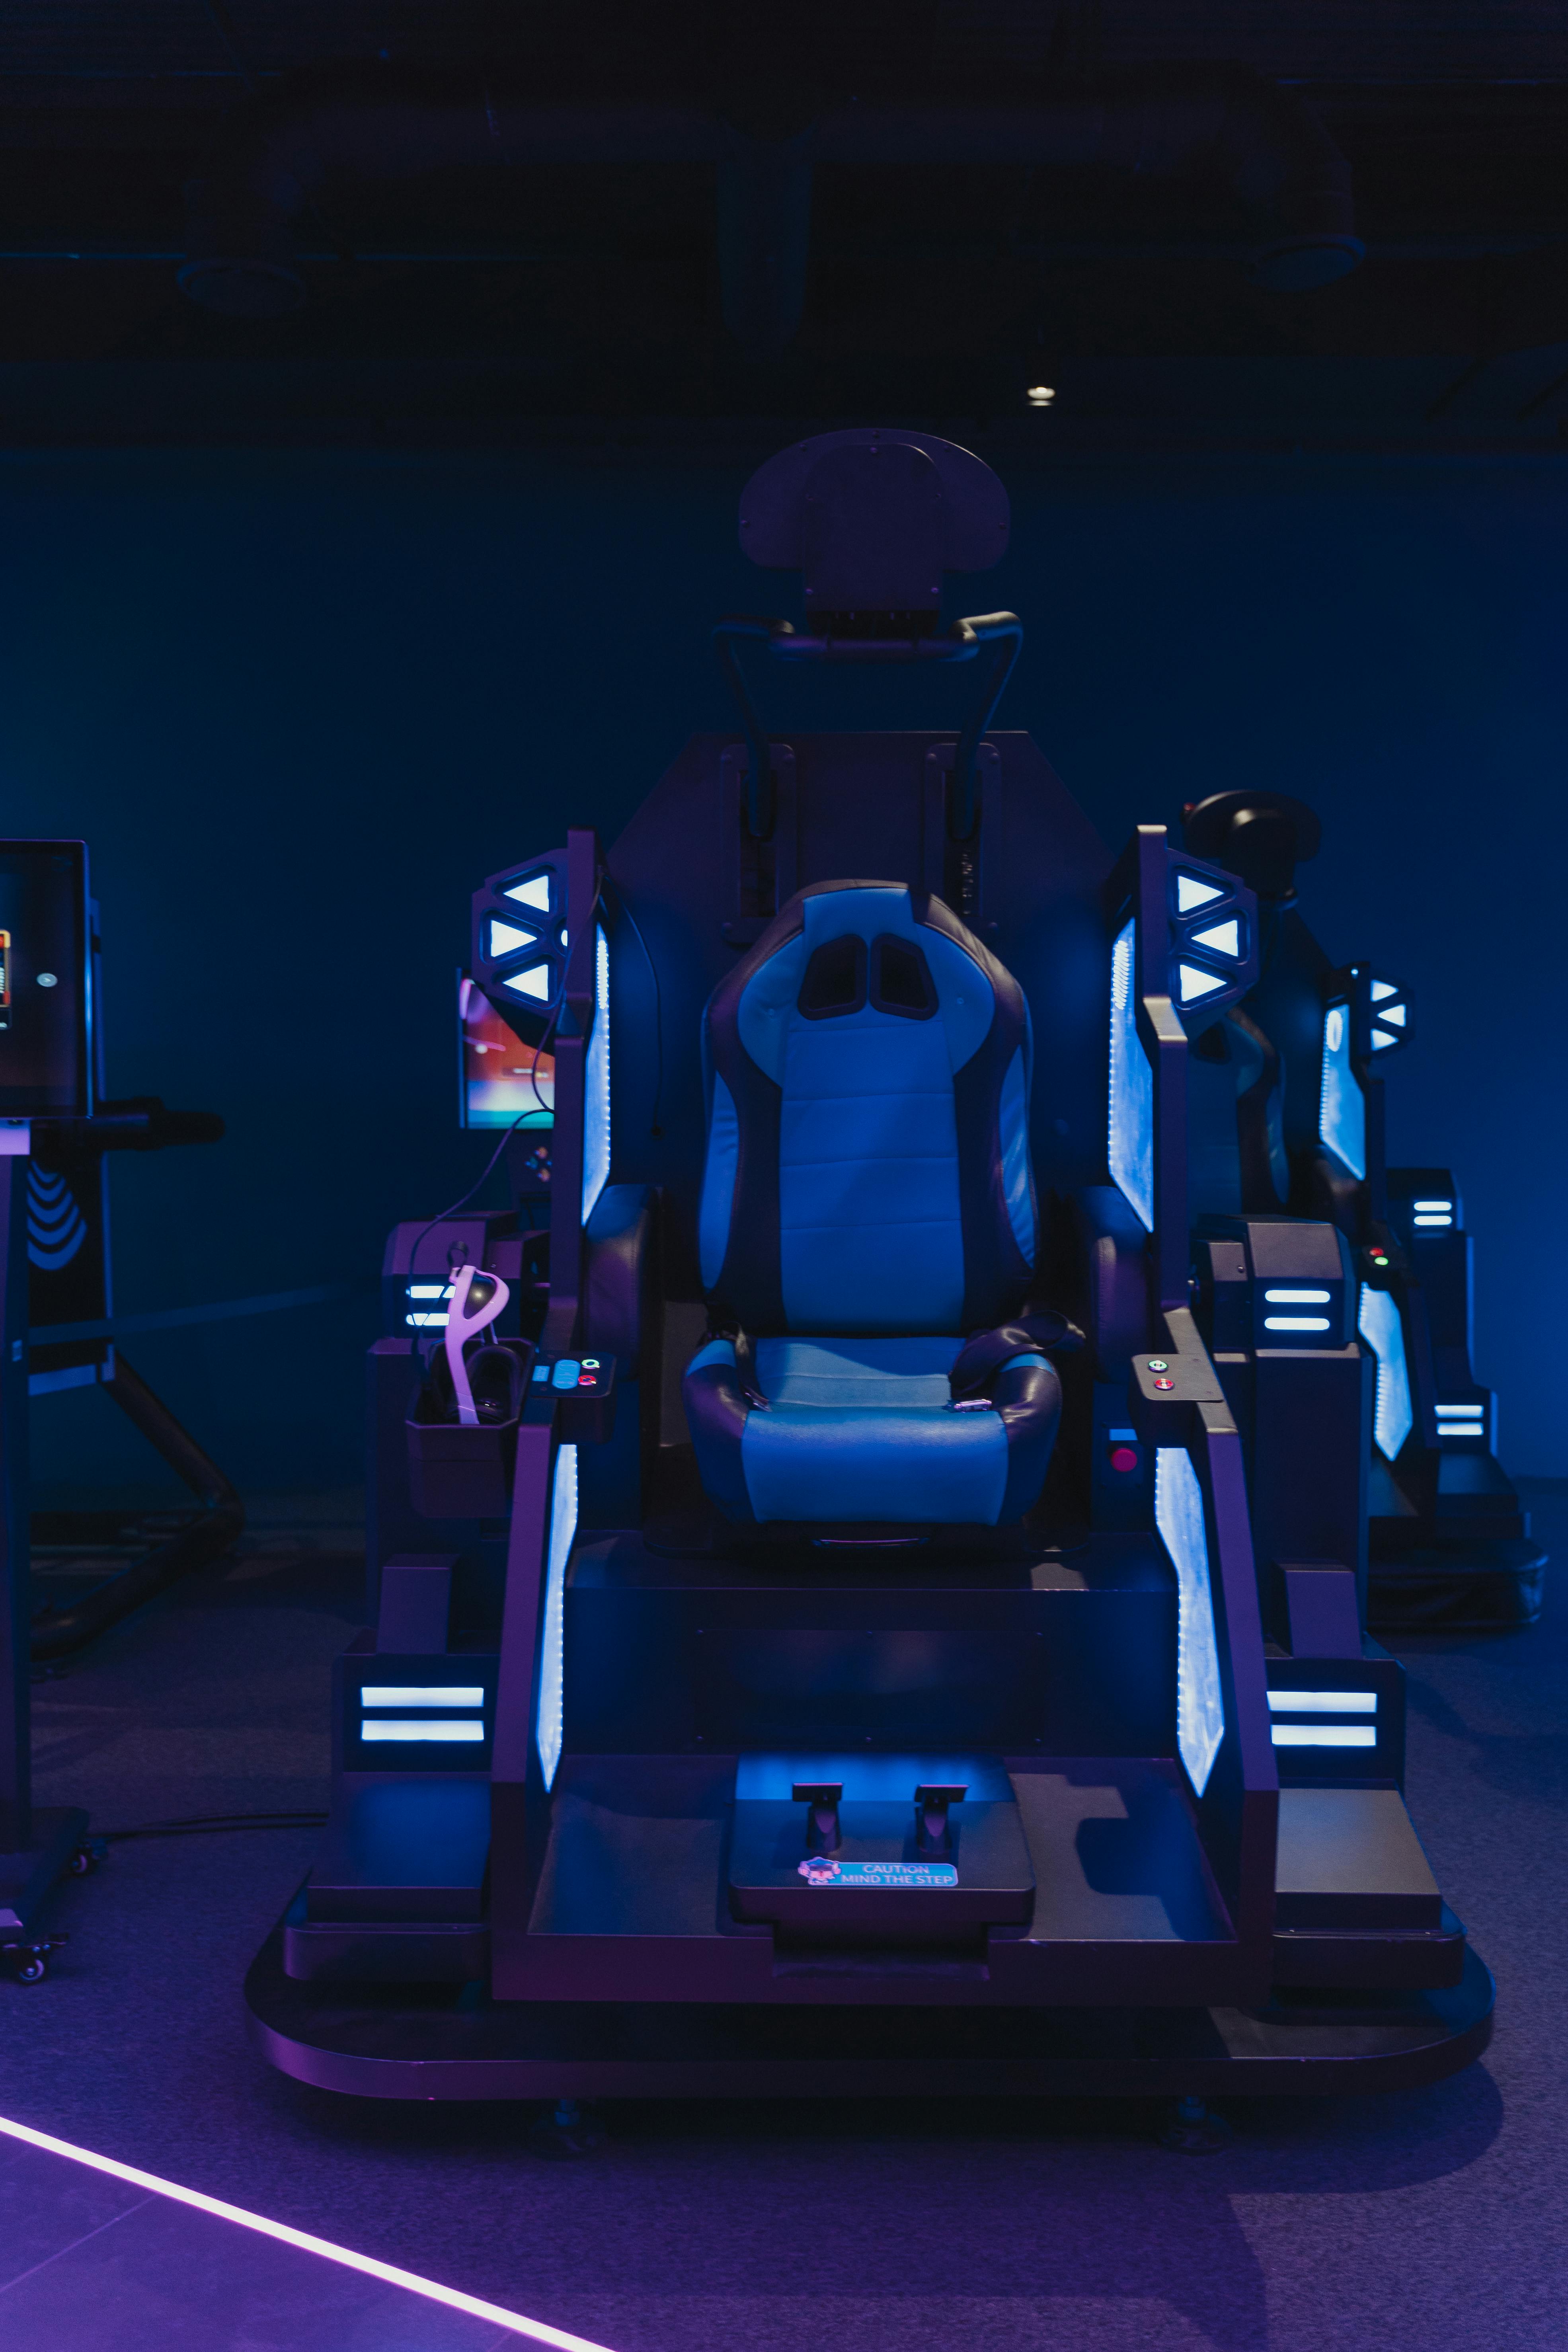 A new fancy gaming chair on display | Source: Pexels